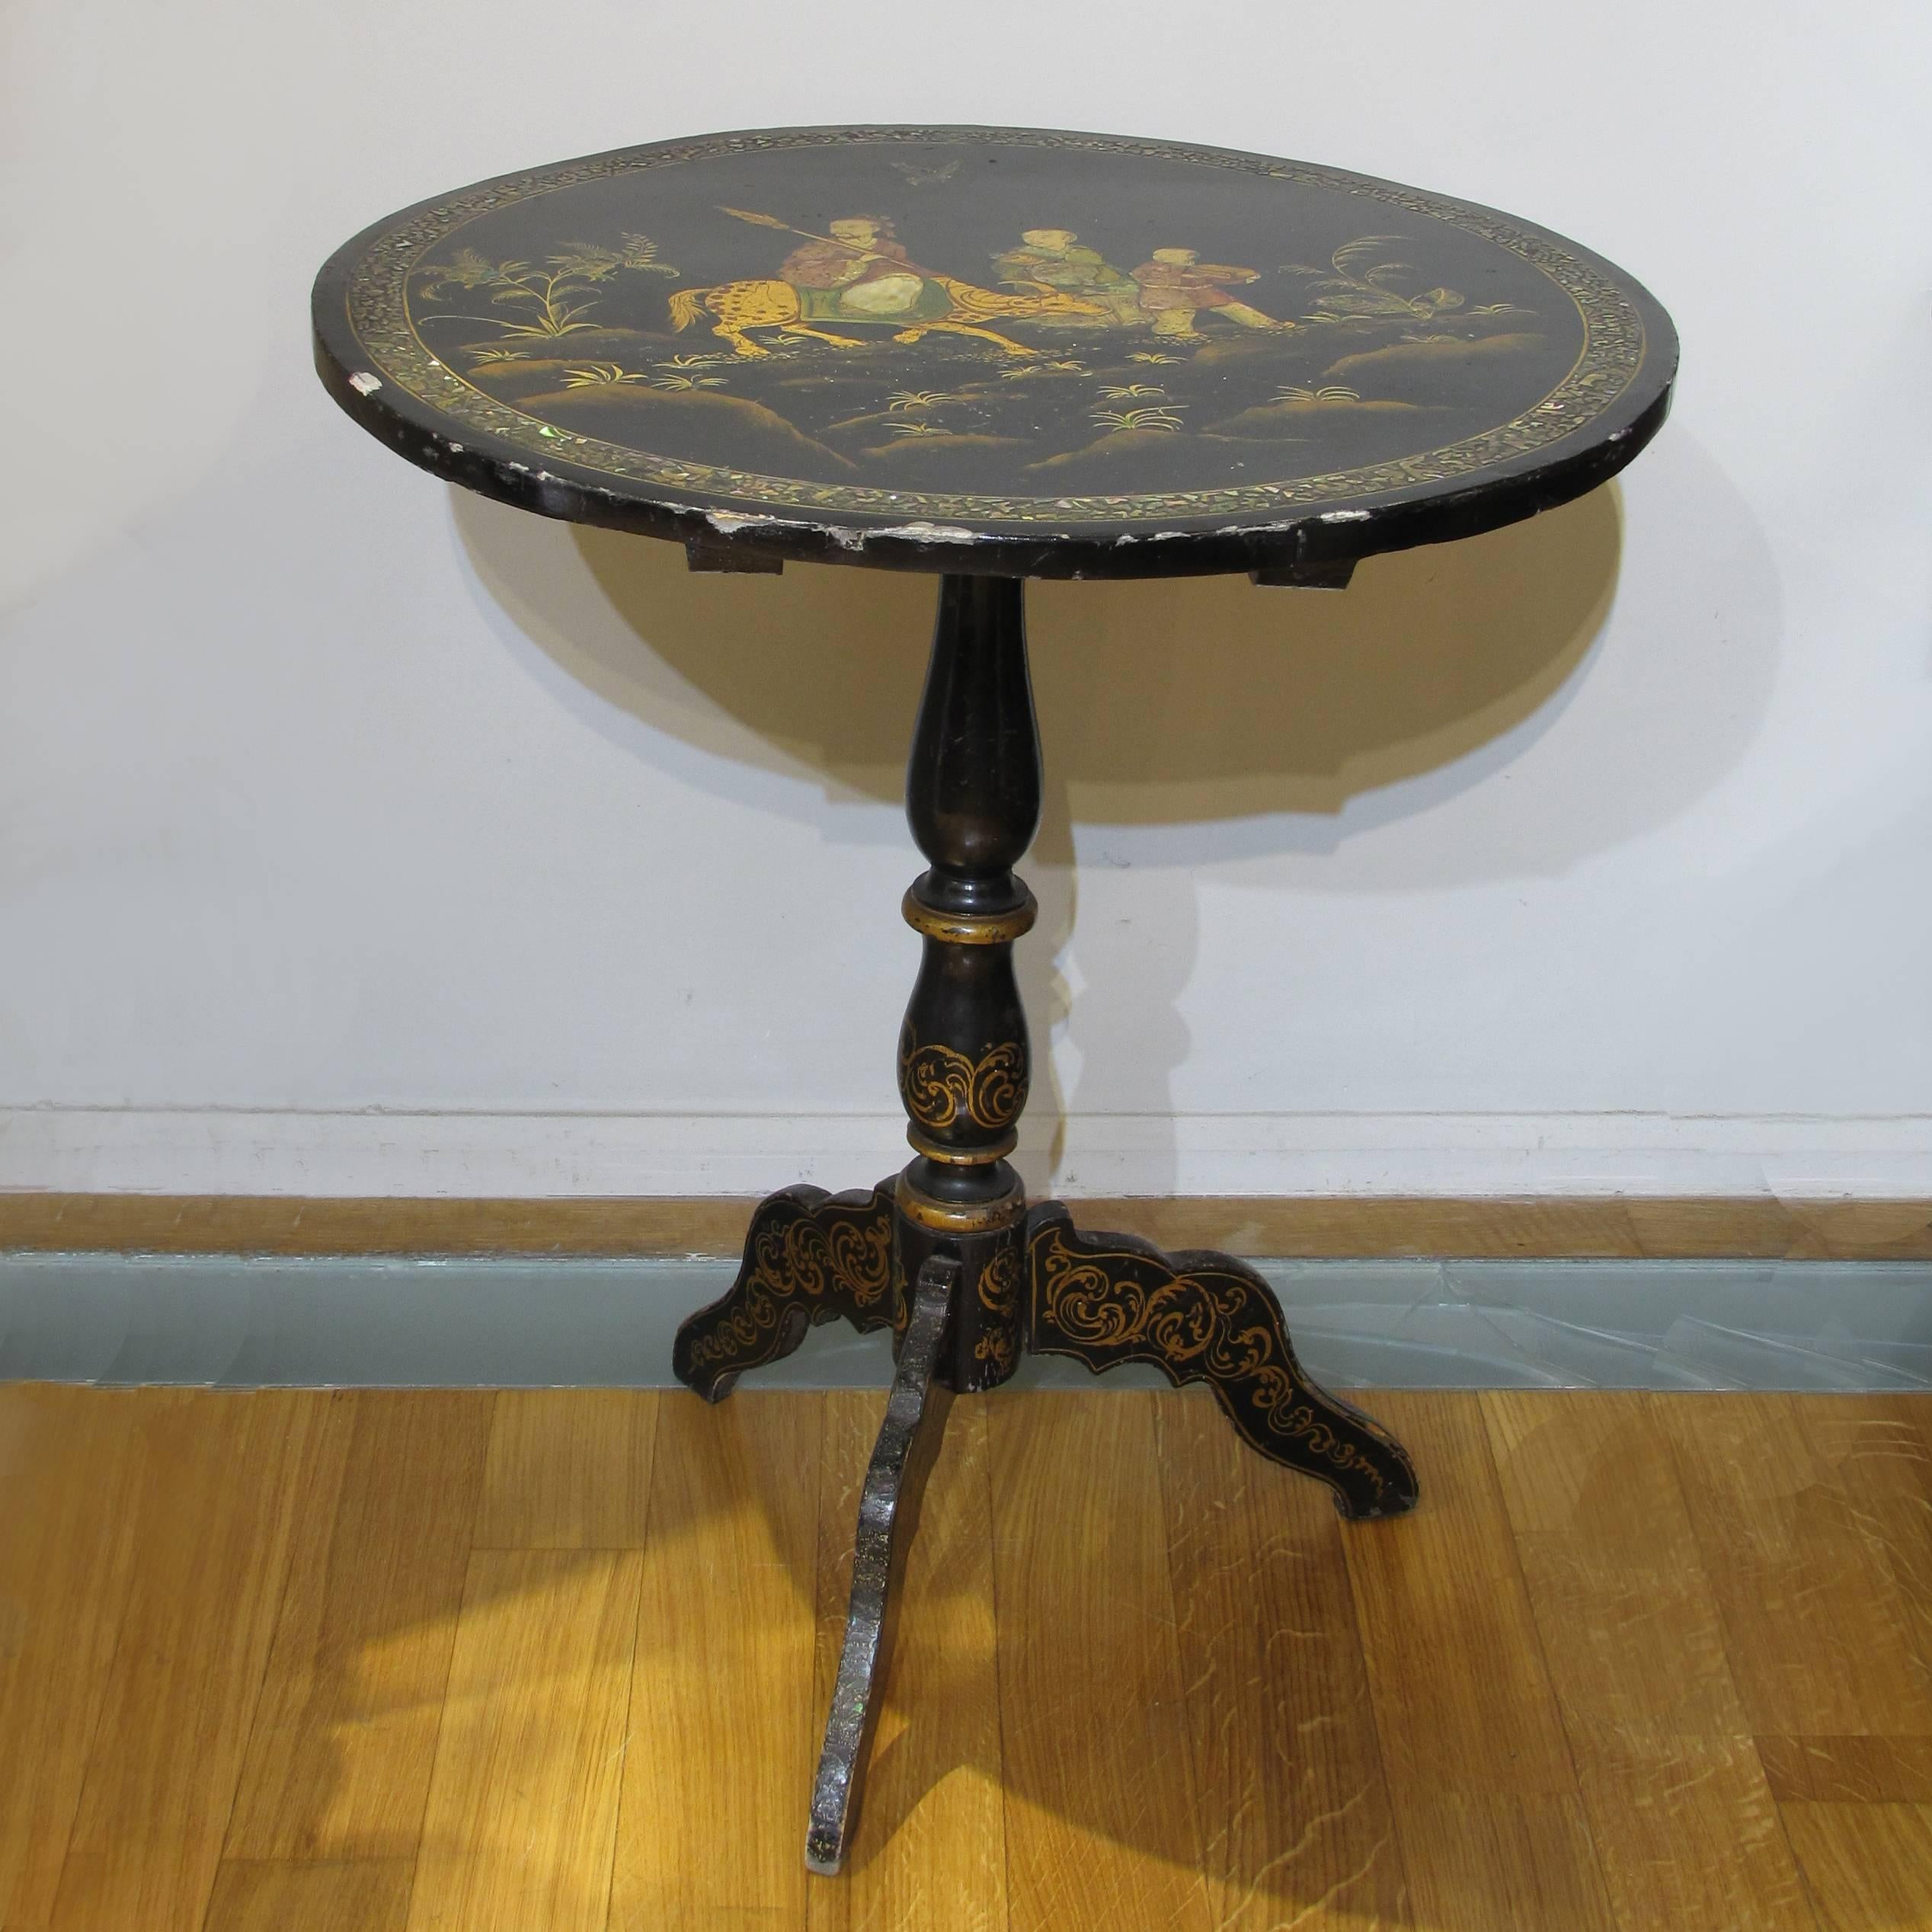 A particular Regency period lacquered Chinese tilt-top center table standing on a tripod base, circa 1820.
The tabletop features a hand painted polychrome oriental decoration depicting a scene of Chinese mythology and is decorated with mother of